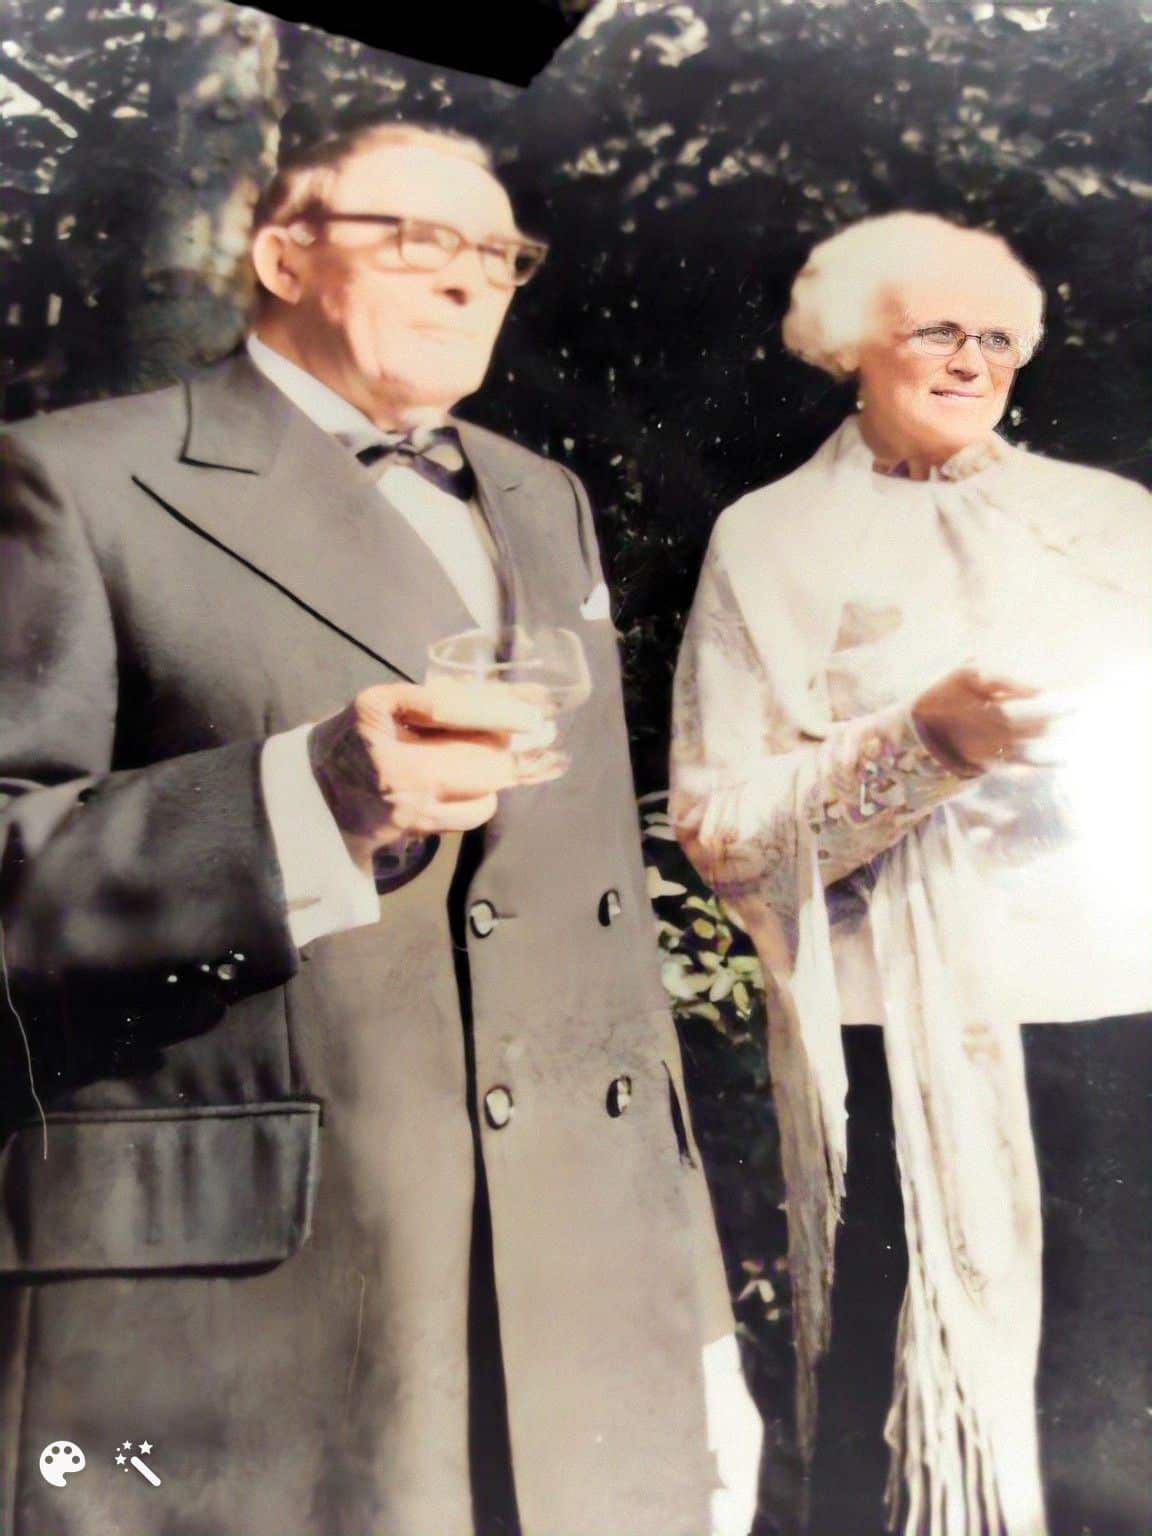 My grandfather Bror and his wife Metta. Photo colorized and enhanced by MyHeritage